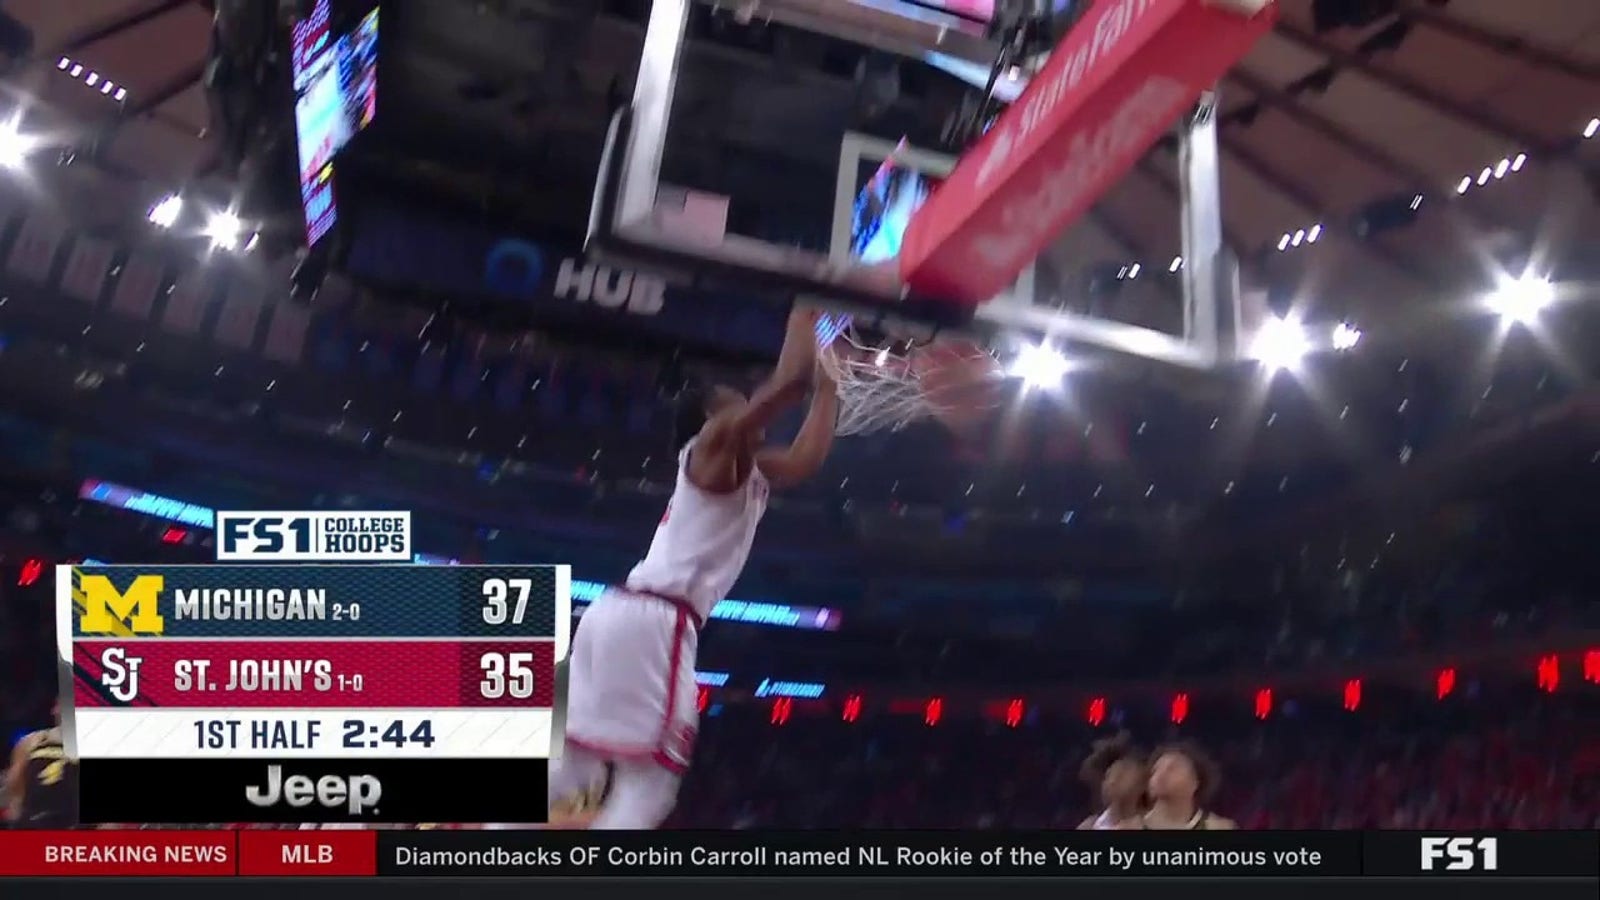 St. John's Jordan Dingle slams a two-handed dunk to trim Michigan's lead to two points